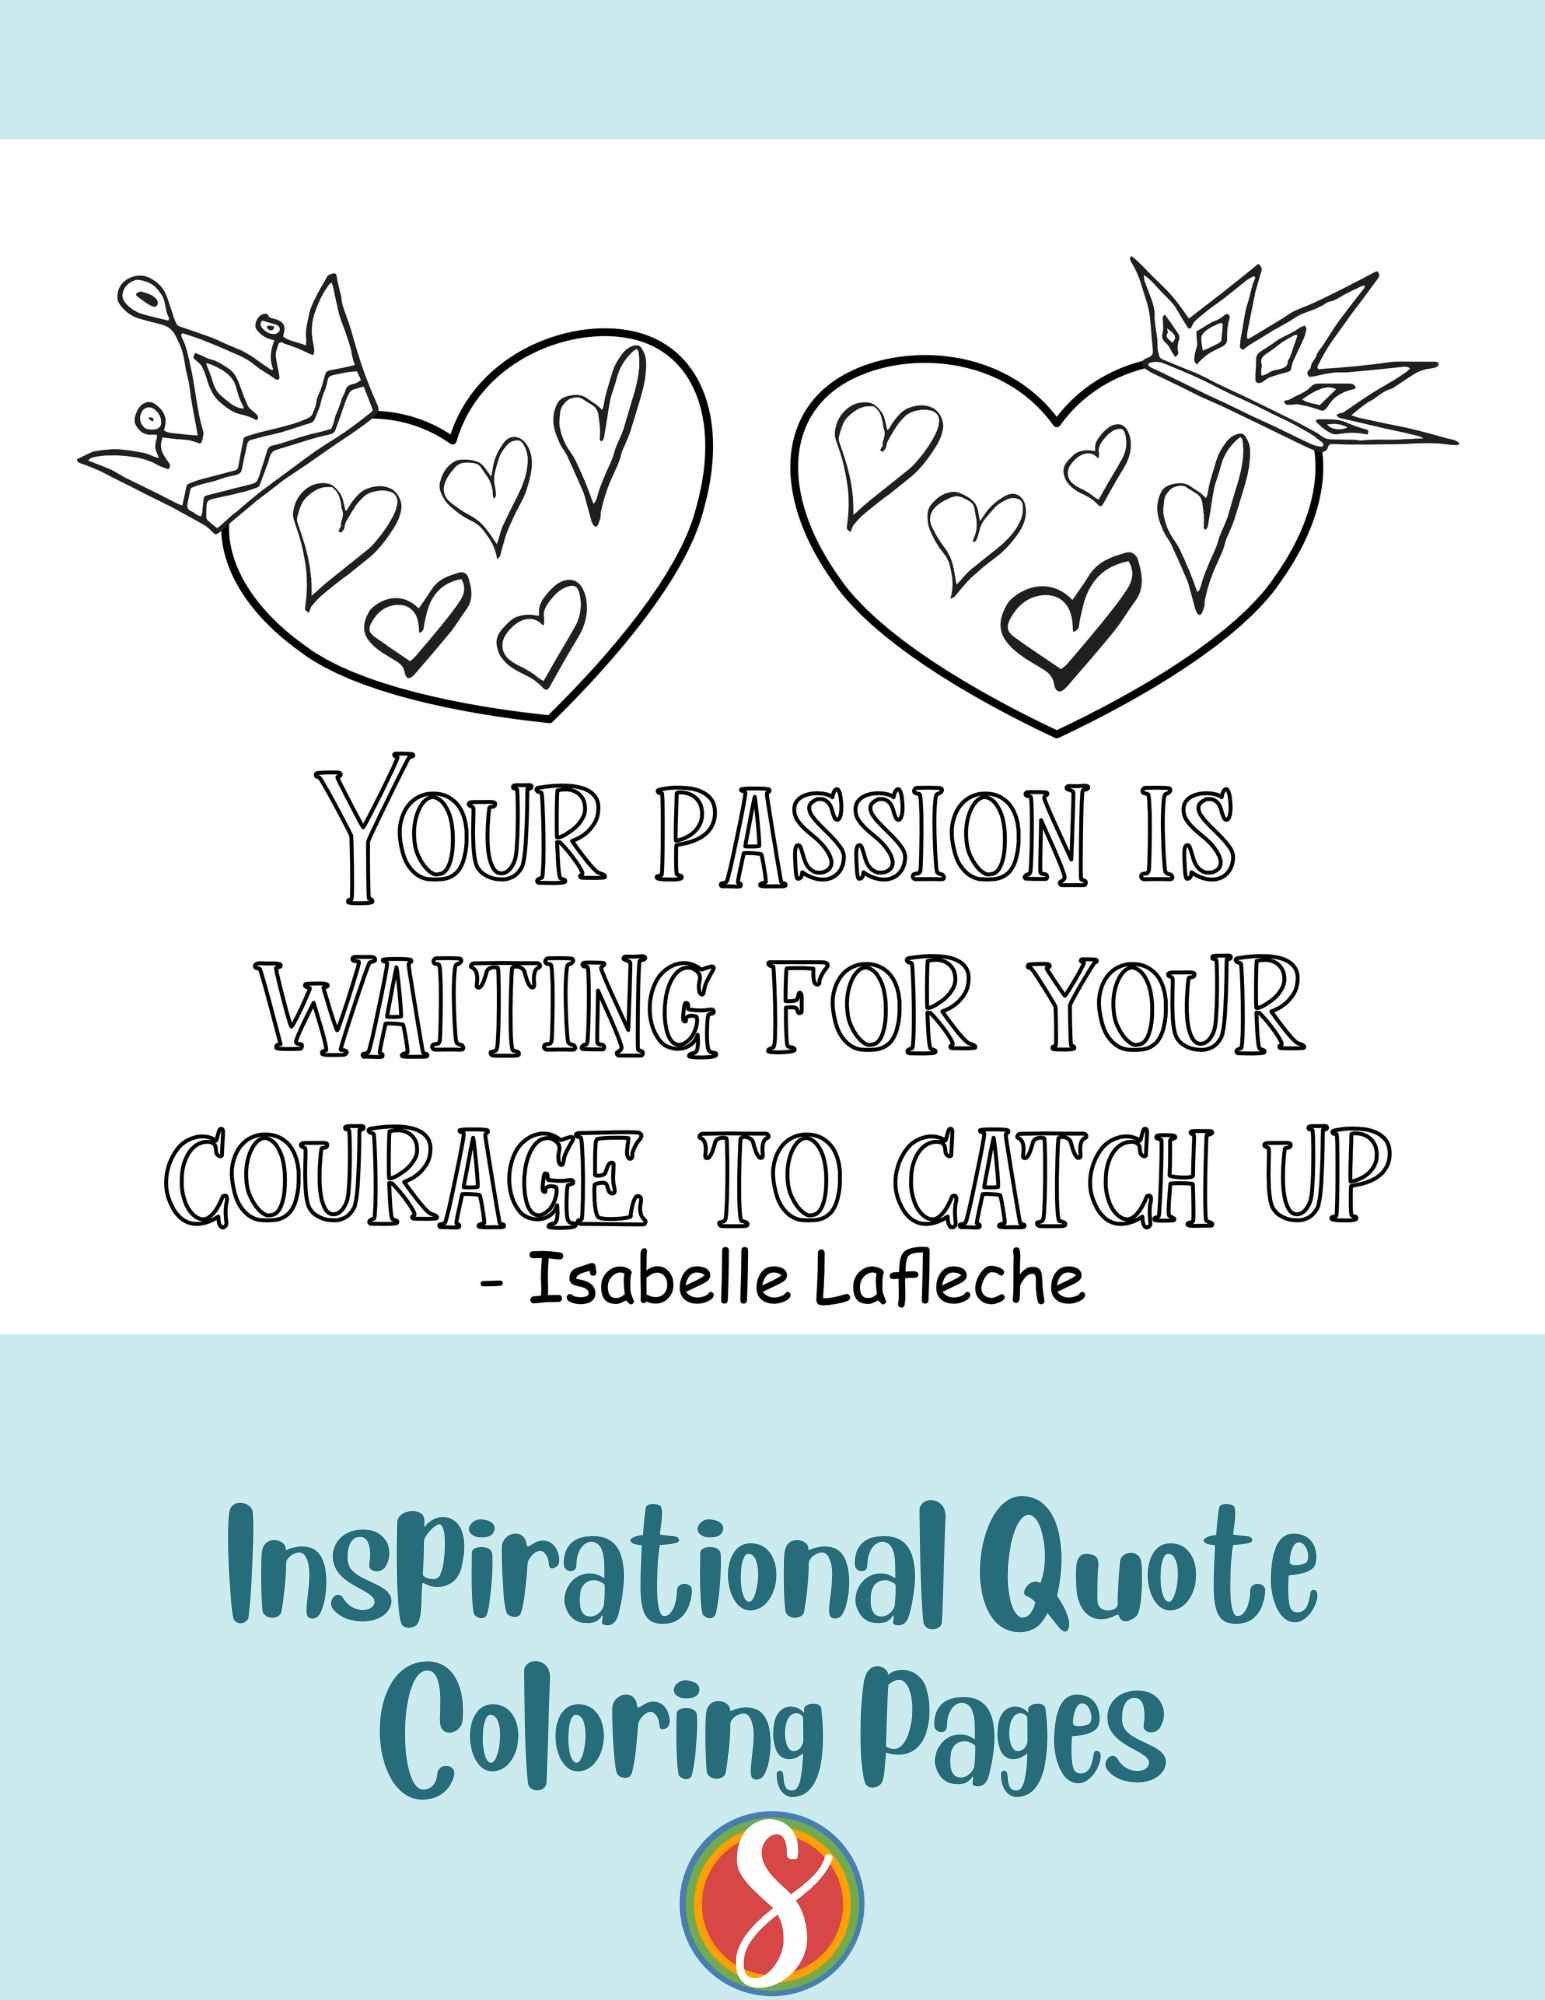 2 hearts with little hearts inside and crowns on each, colorable words "your passion is waiting for your courage to catch up"